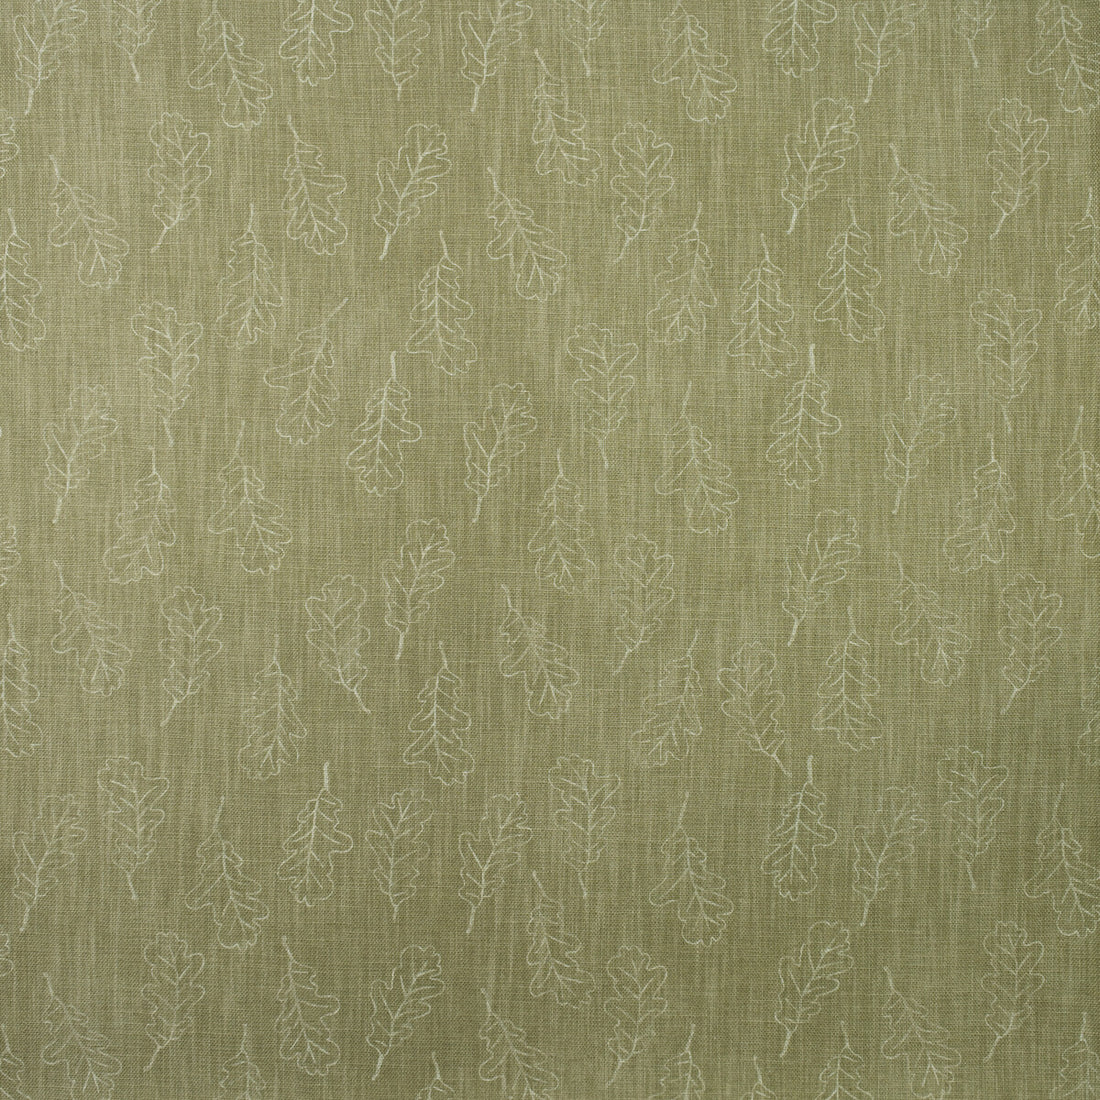 Noble Oak fabric in lichen color - pattern AM100398.3.0 - by Kravet Couture in the Andrew Martin Woodland By Sophie Paterson collection